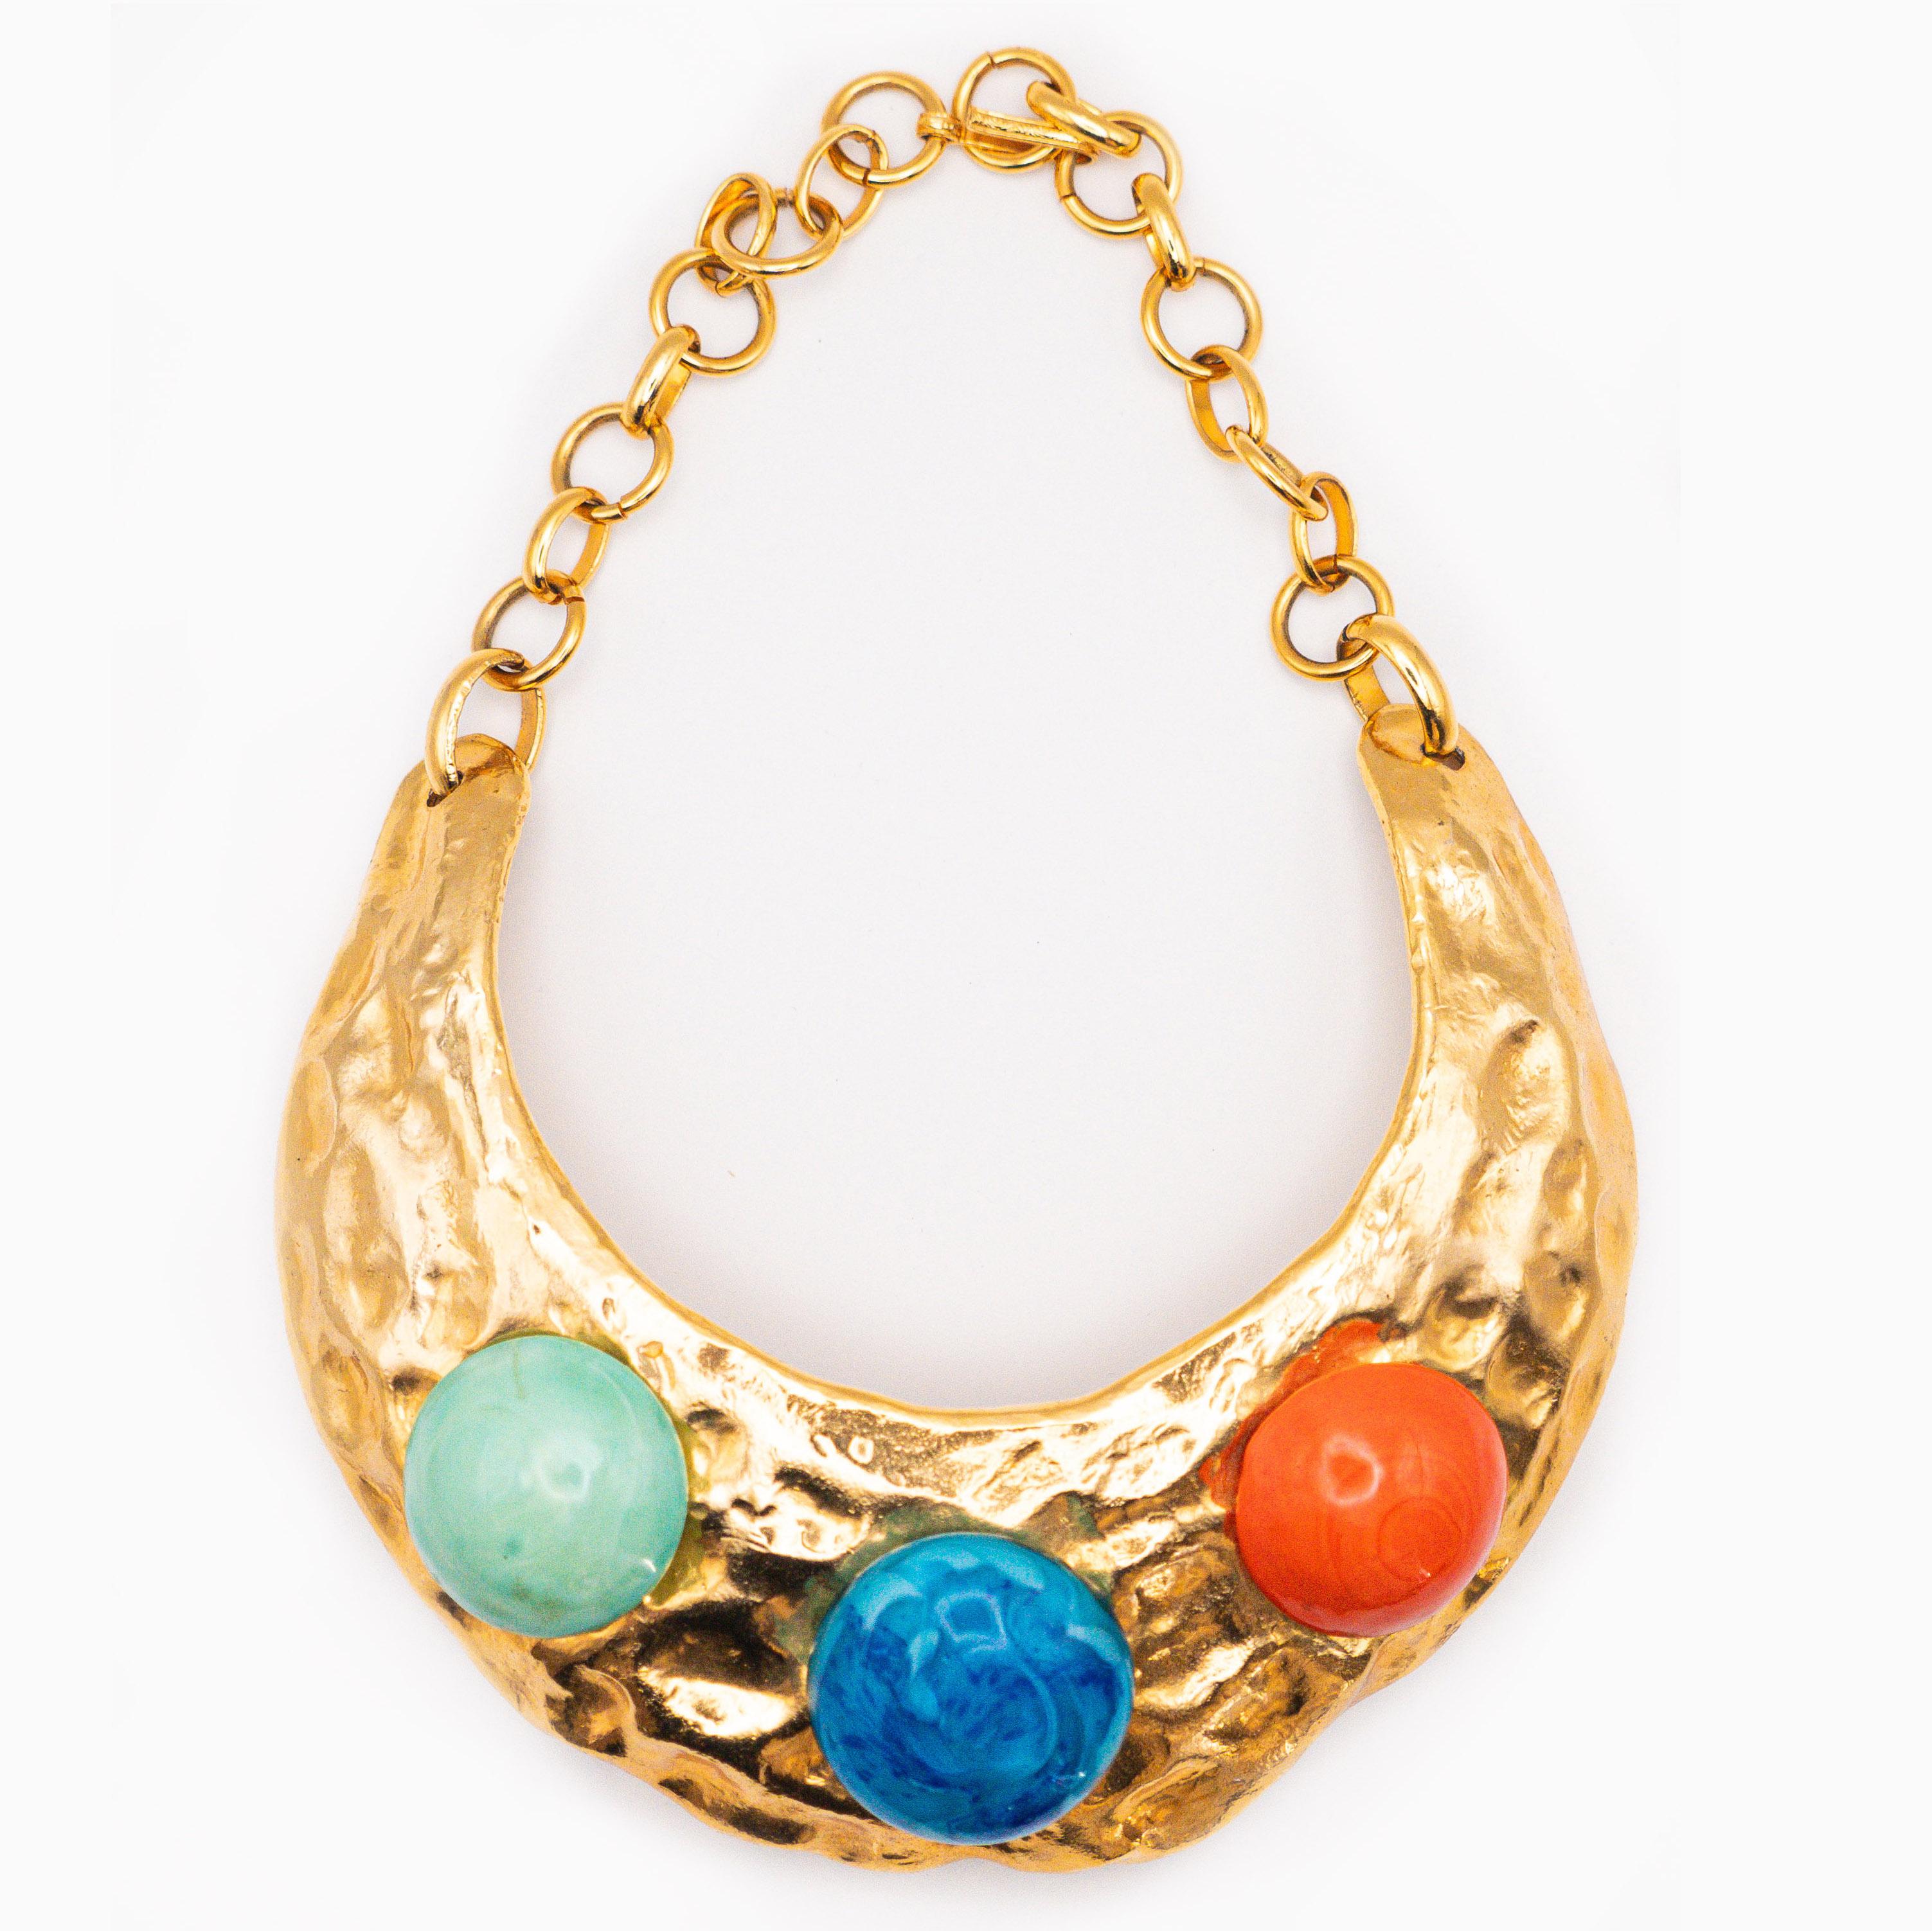 YVES SAINT LAURENT Haute Couture by ROBERT GOOSSENS 
Stiff torque necklace in hammered gilt metal decorated with polychrome ceramic cabochons - unsigned I
Interior width 9 cm
12x14cm

Robert Goossens (30 January 1927 – 7 January 2016) was a French